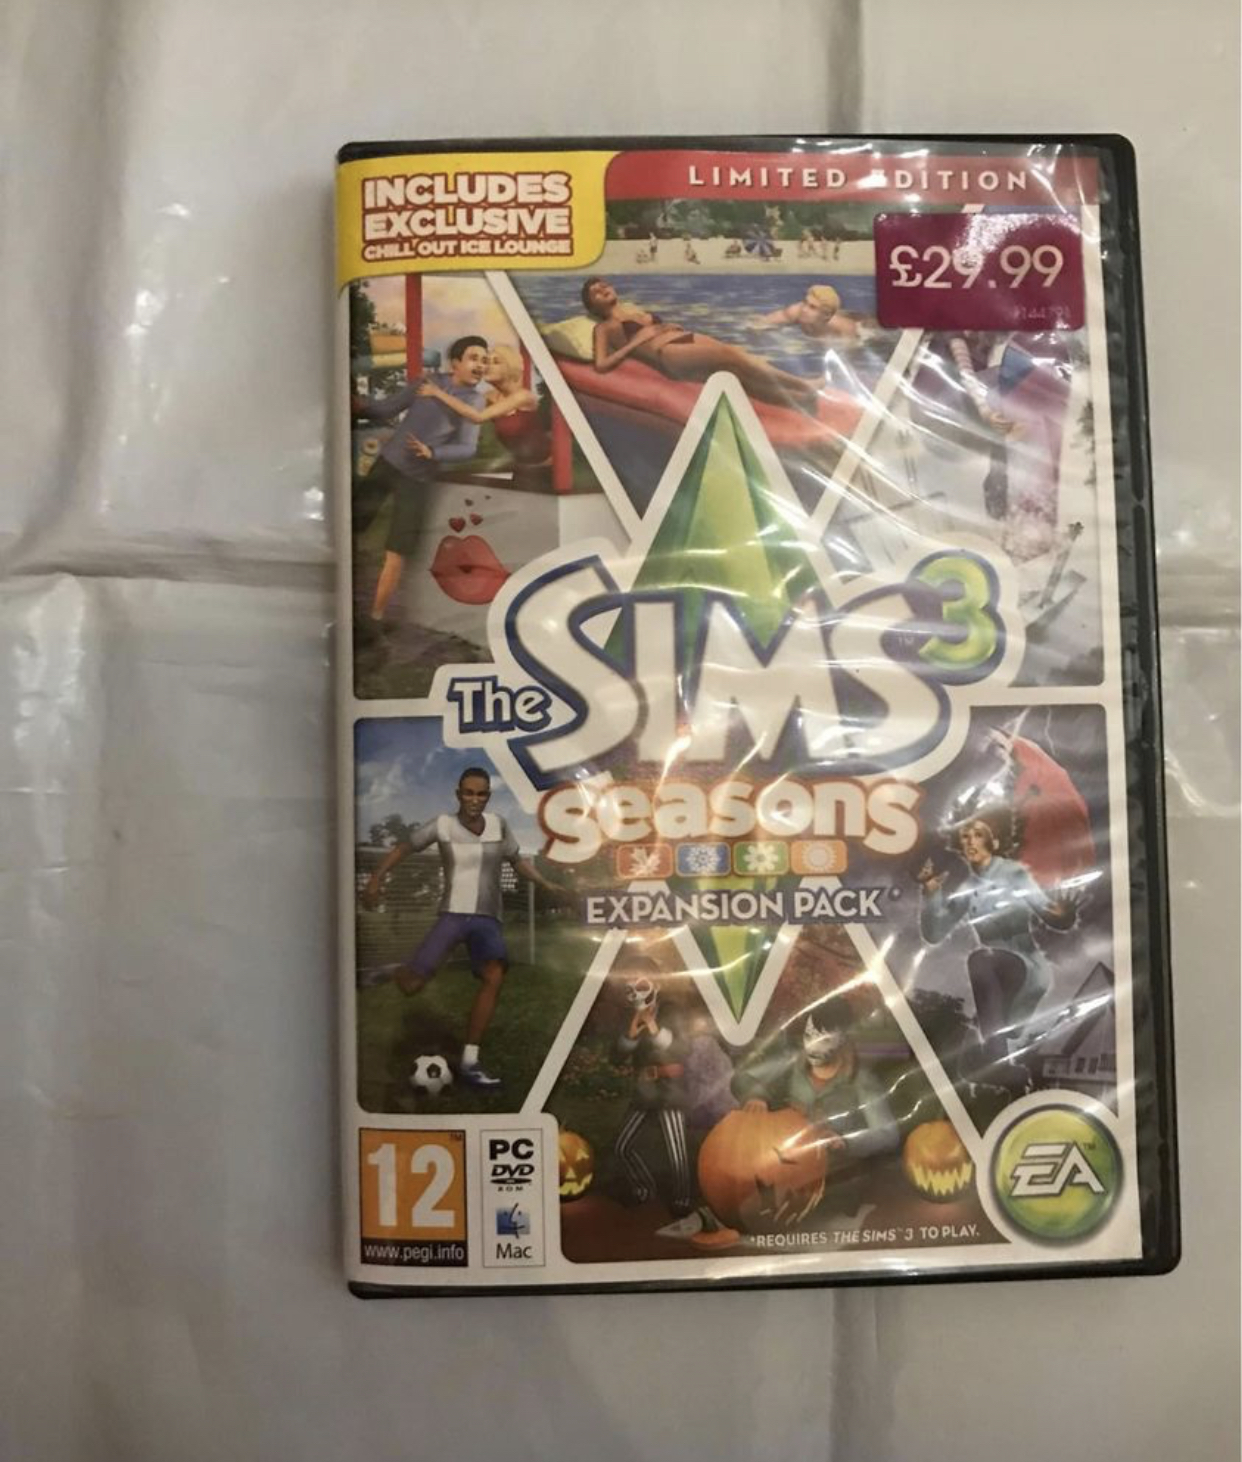 The sims 3 seasons PC game expansion pack